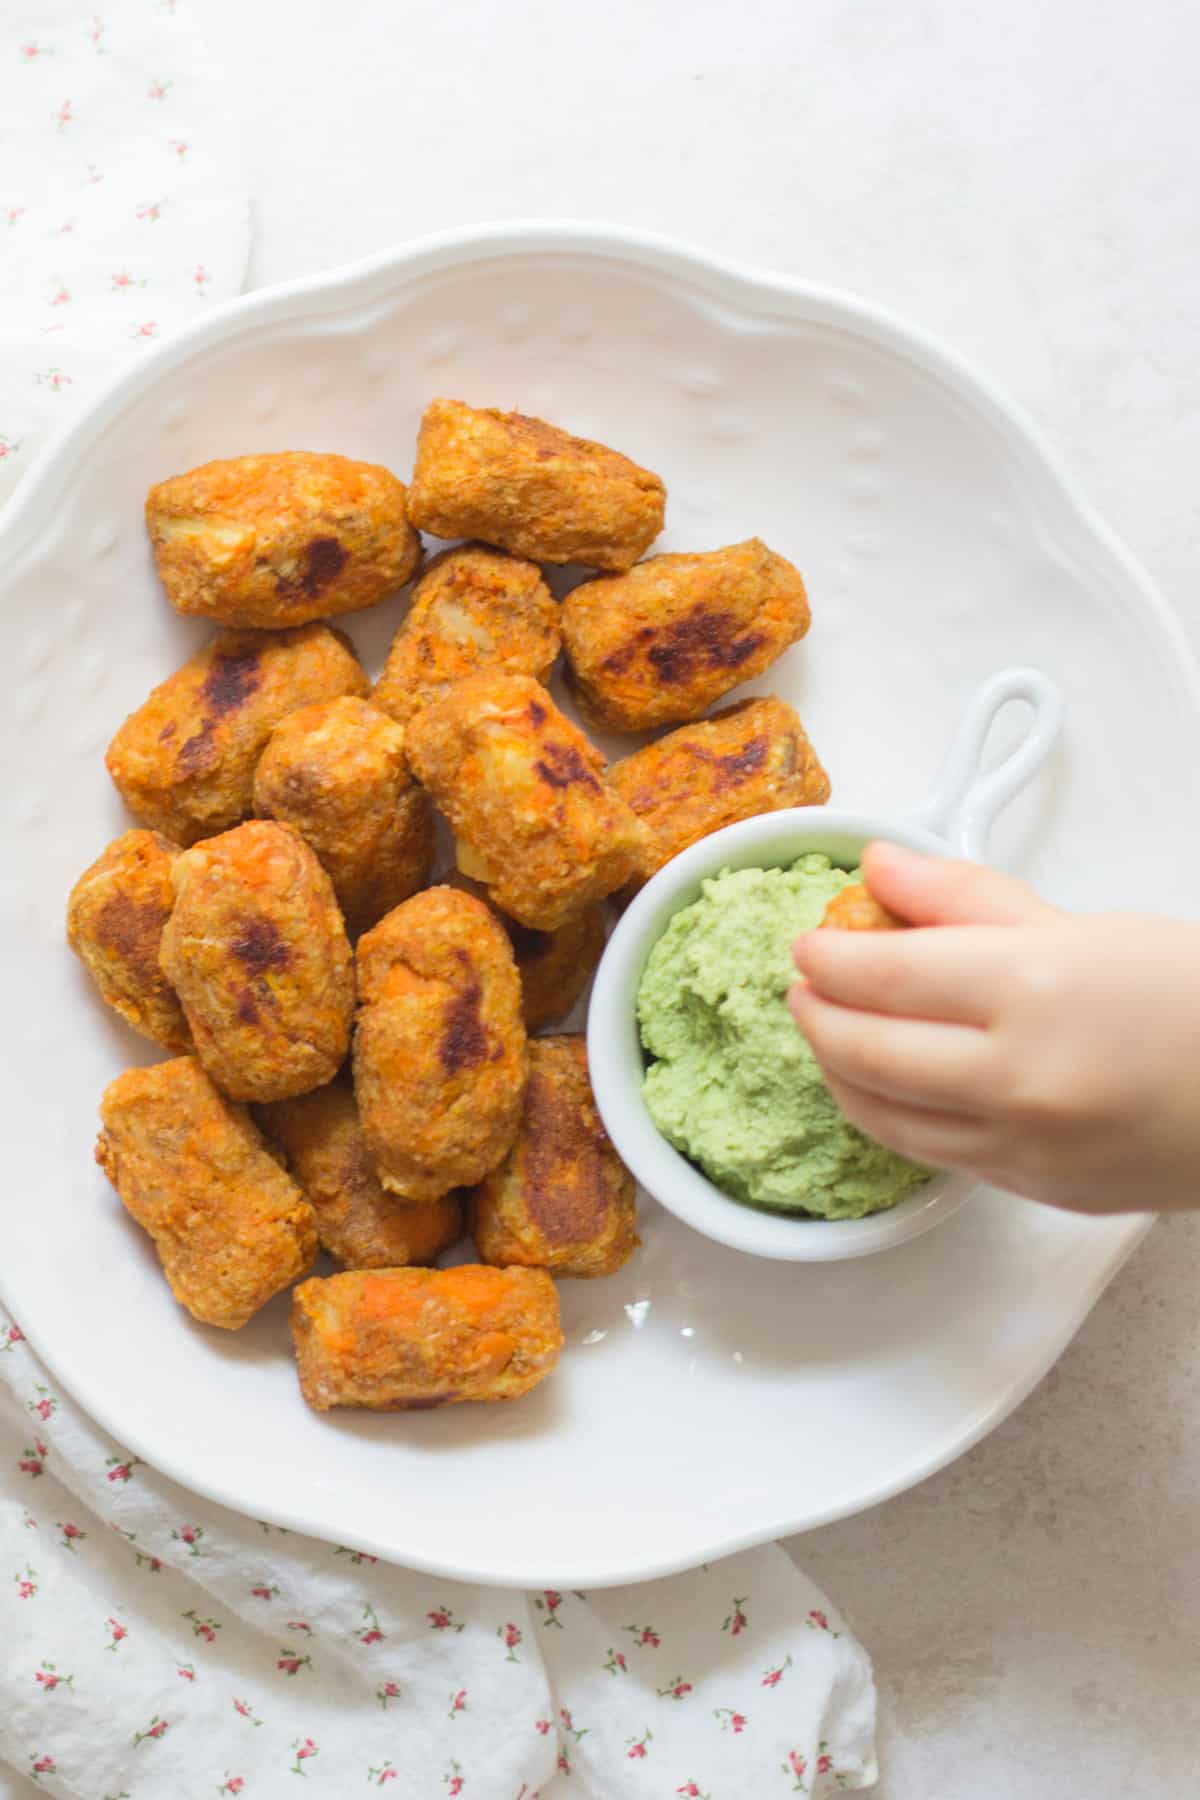 tots plated on a white plate with toddler's hand dipping one into green hummus.